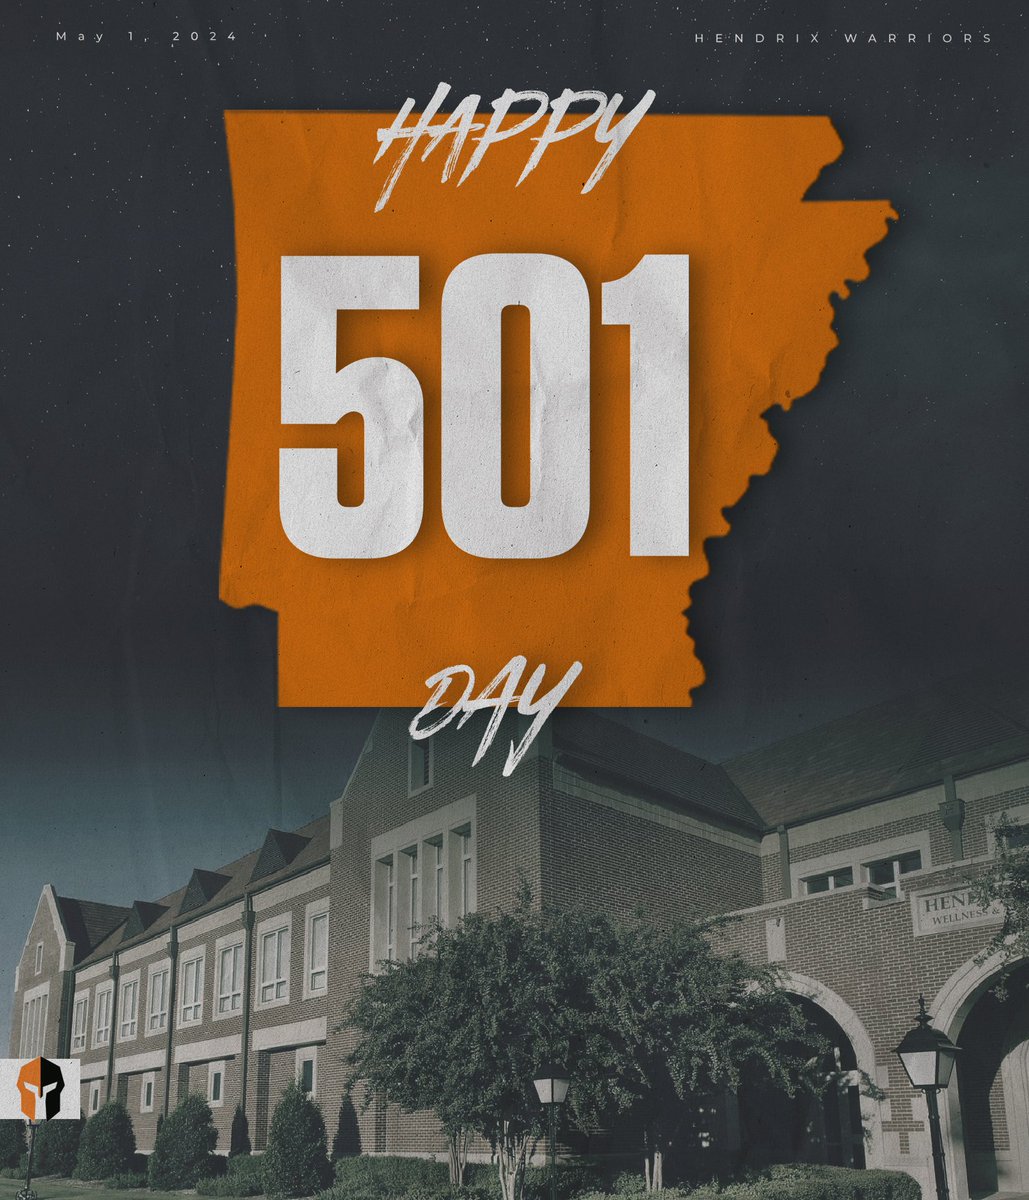 Safe to say, 5/01 is one of our favorite days around here. It's always a great day to live in the 501! #WeAreWarriors x #TheNaturalState